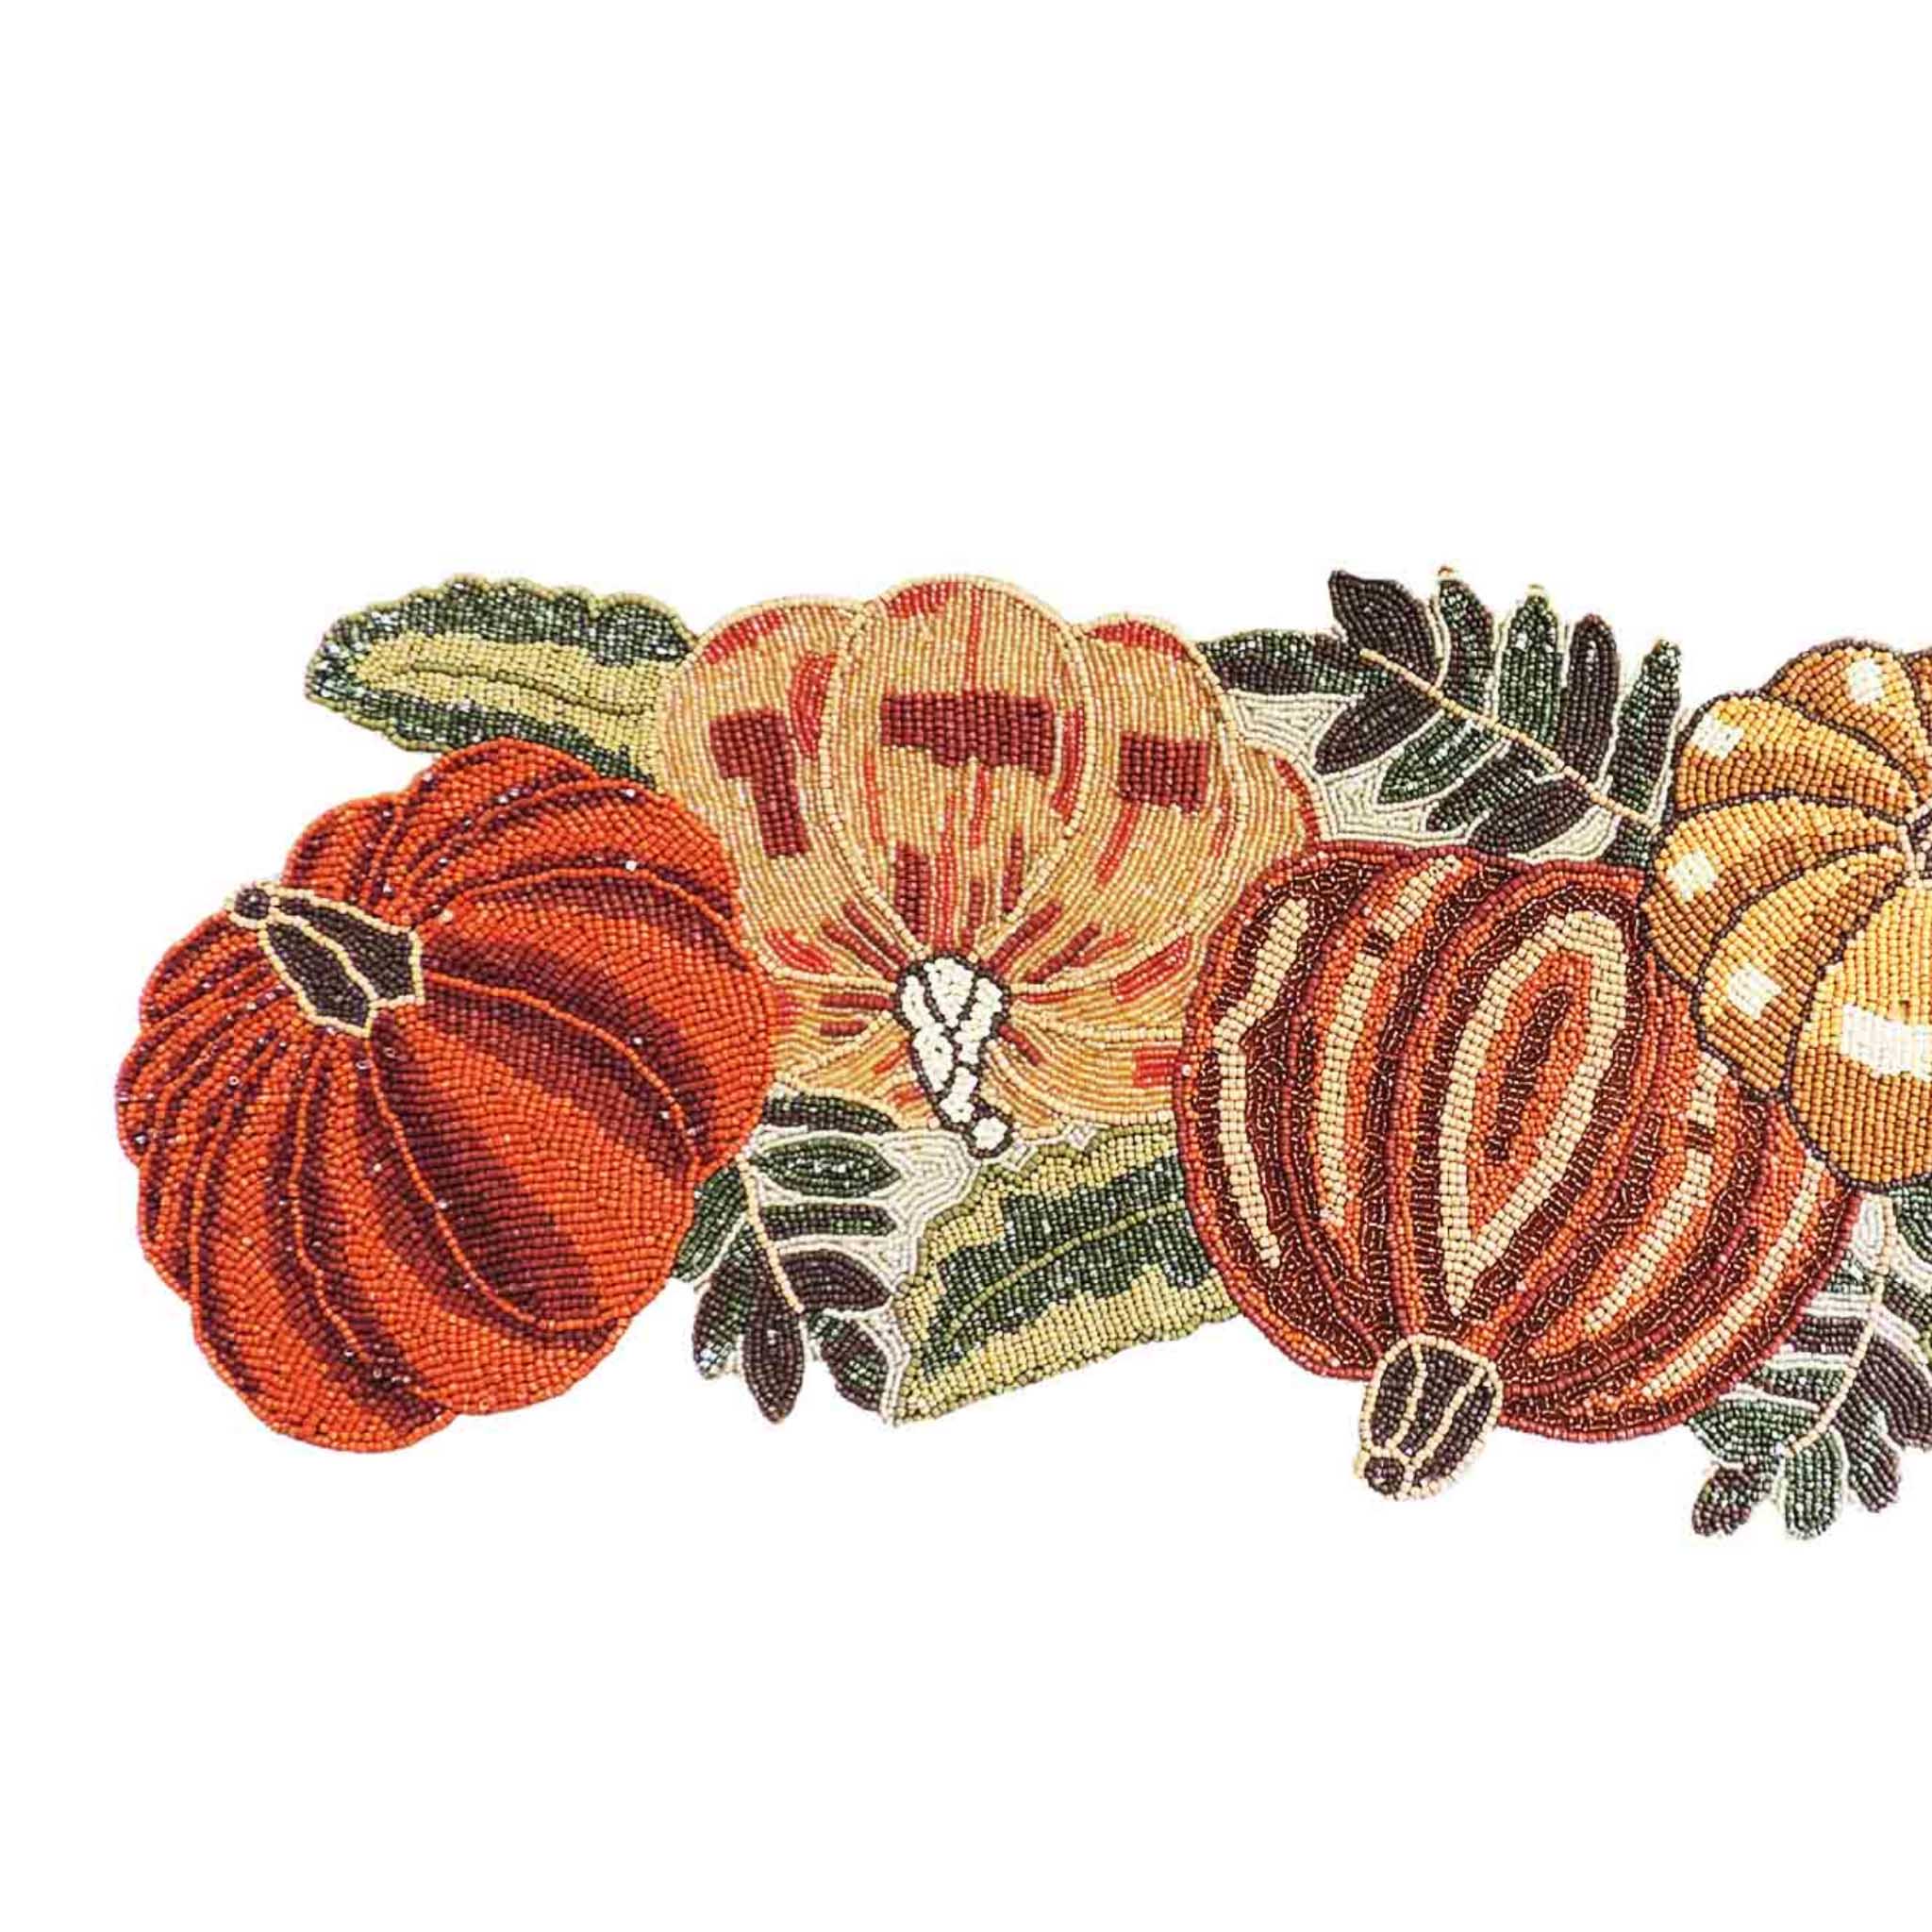 Daisy Gourd Bead Embroidered Table Runner in Orange, Gold & Green